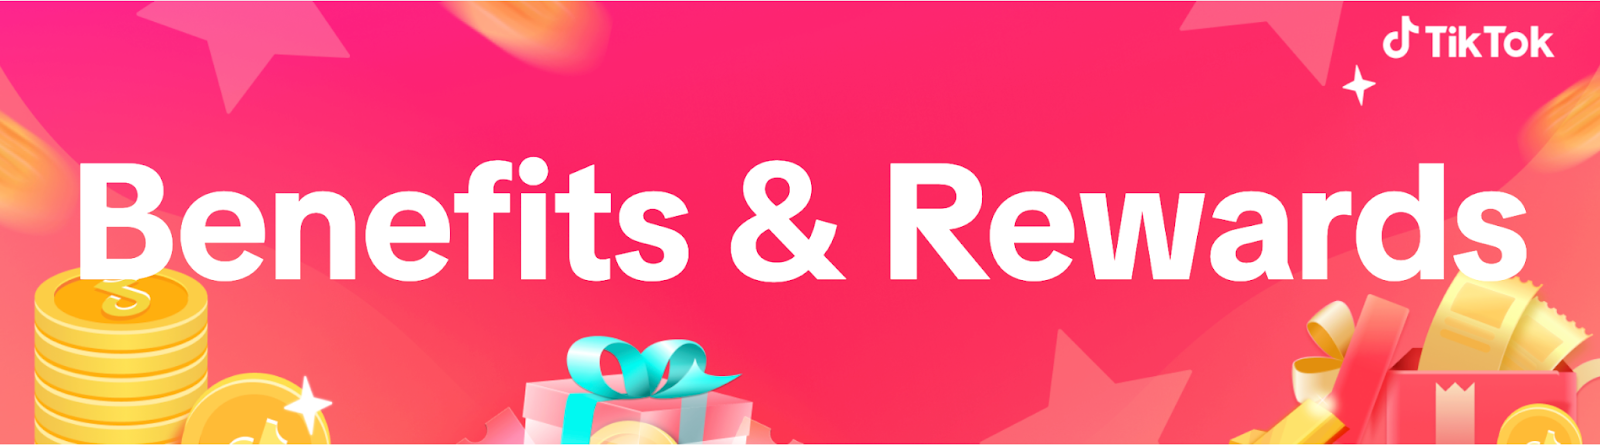 Banner featuring piles of gold coins and gifts representing the TikTok Rewards program.